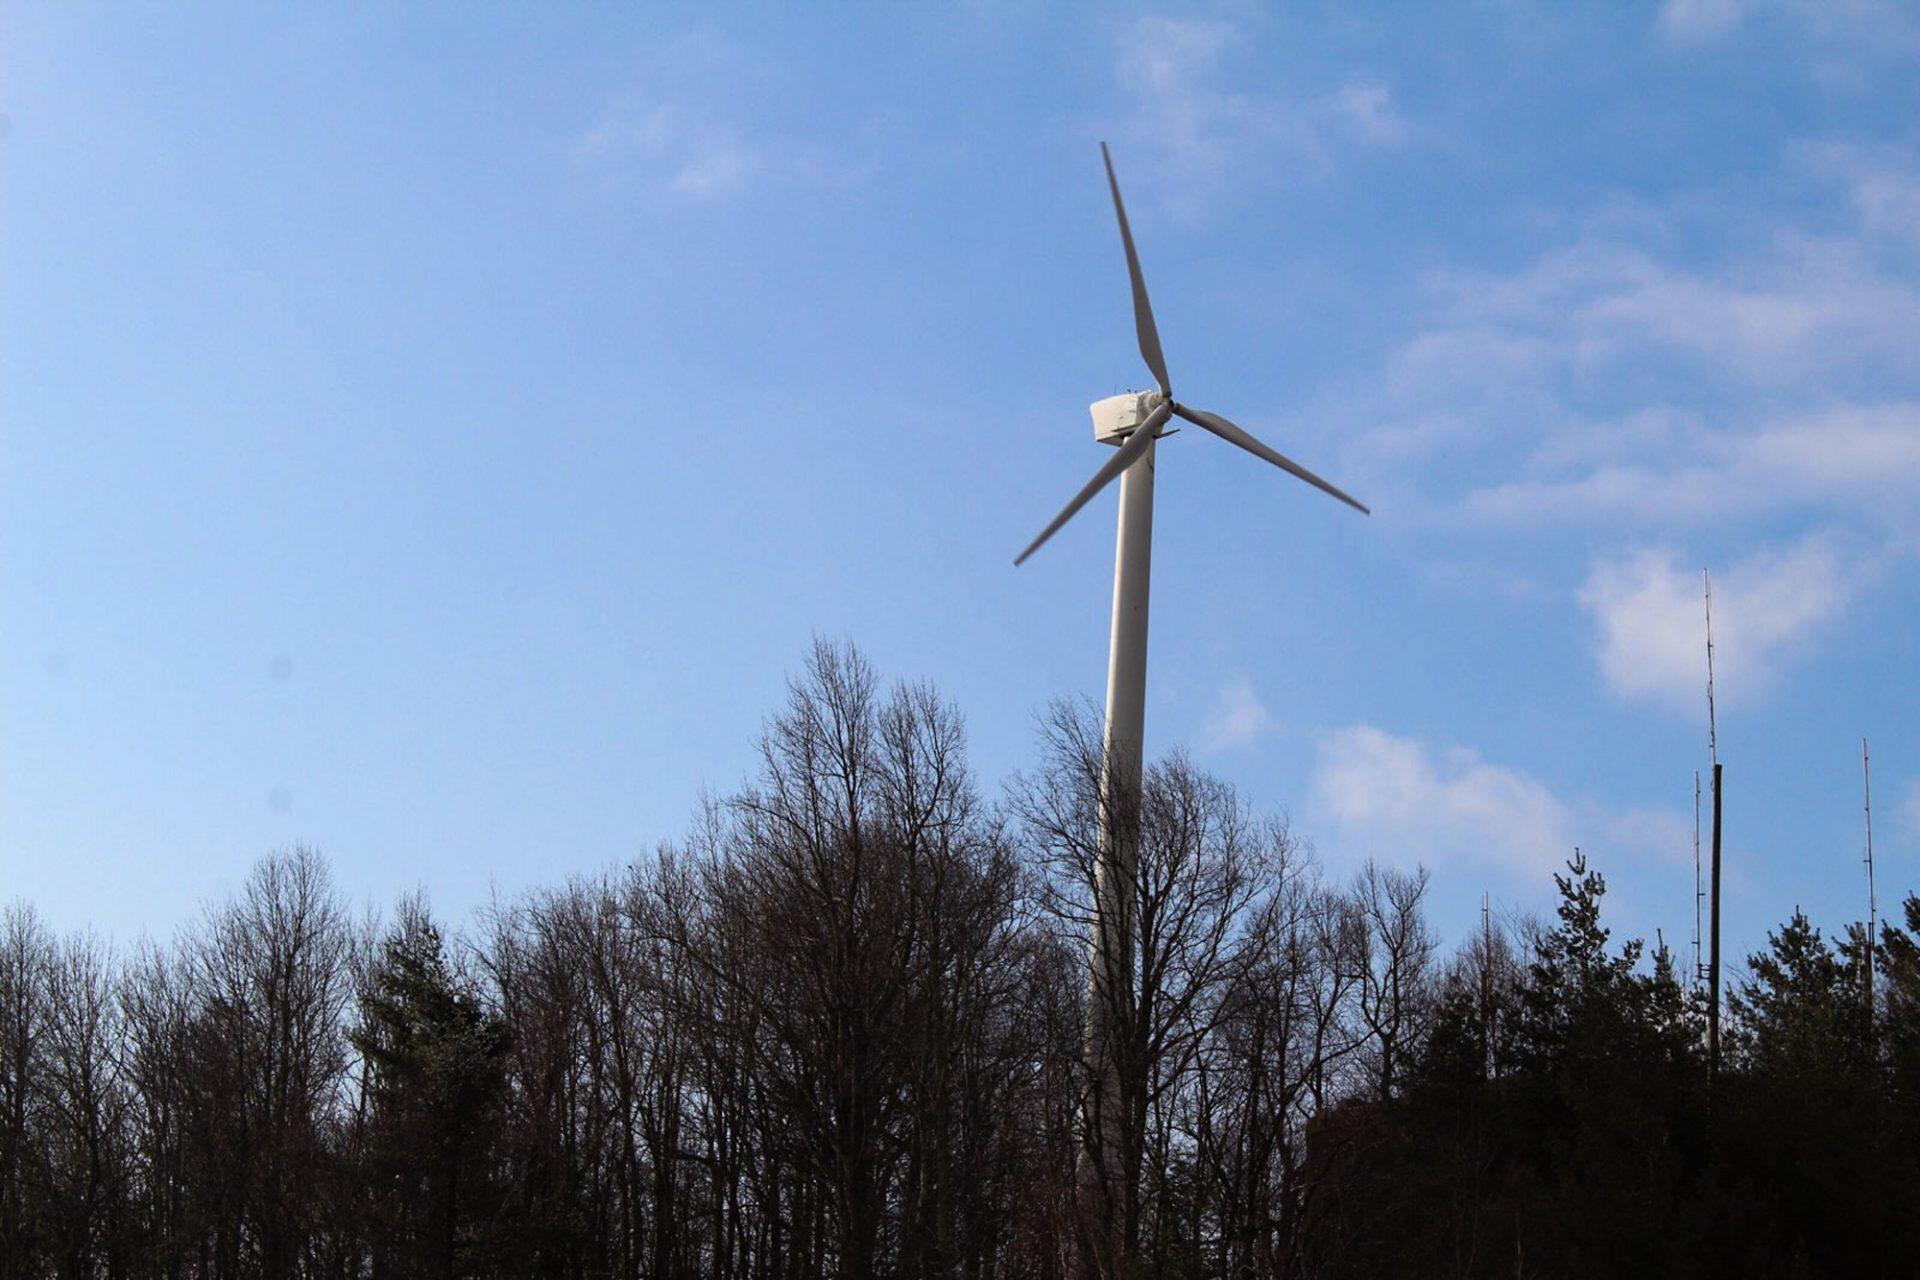 The Broyhill wind turbine at Appalachian State was installed in June 2009. It stands at the highest point on campus at 755 Bodenheimer Road. The turbine allows Appalachian State to generate energy while off-setting 200 metric tons of carbon dioxide per a year.